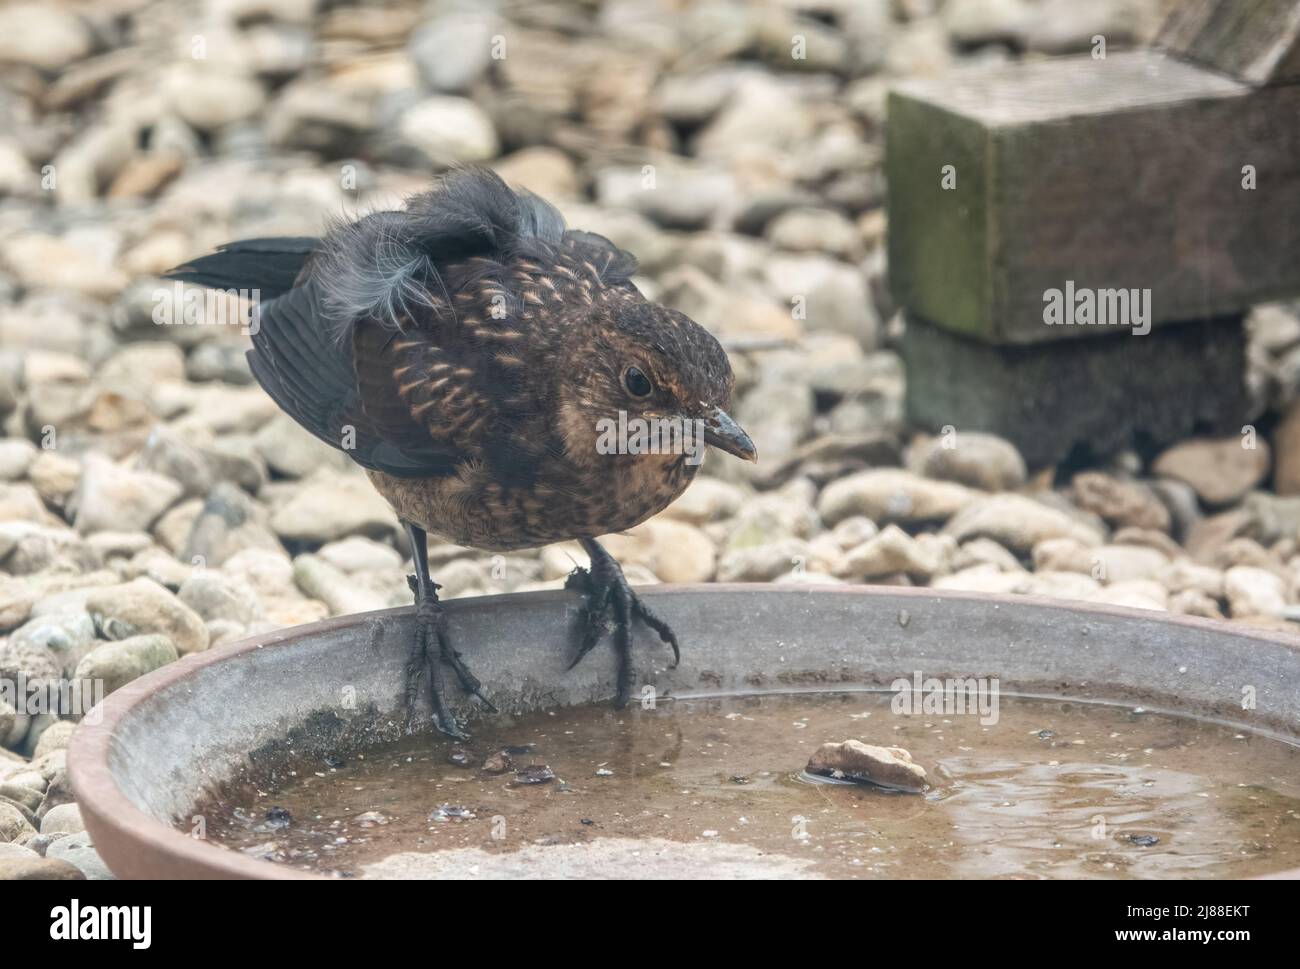 close up of a juvenile blackbird (turdus merula) stood drinking in a water bowl Stock Photo